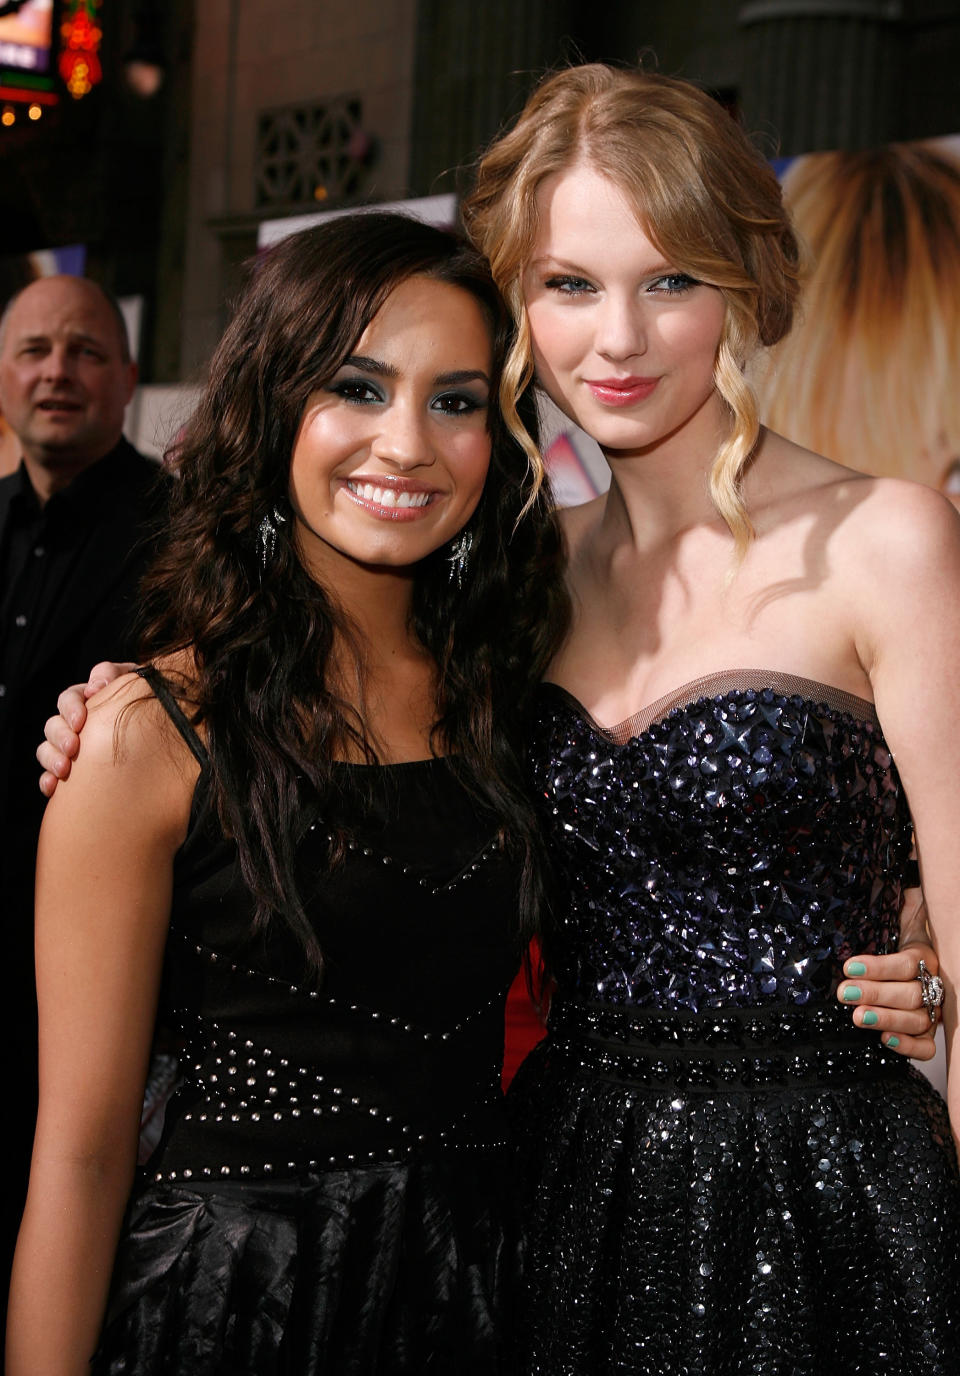 In 2009 at the ‘Hannah Montana’ premiere, the girls were inseperable. Source: Getty